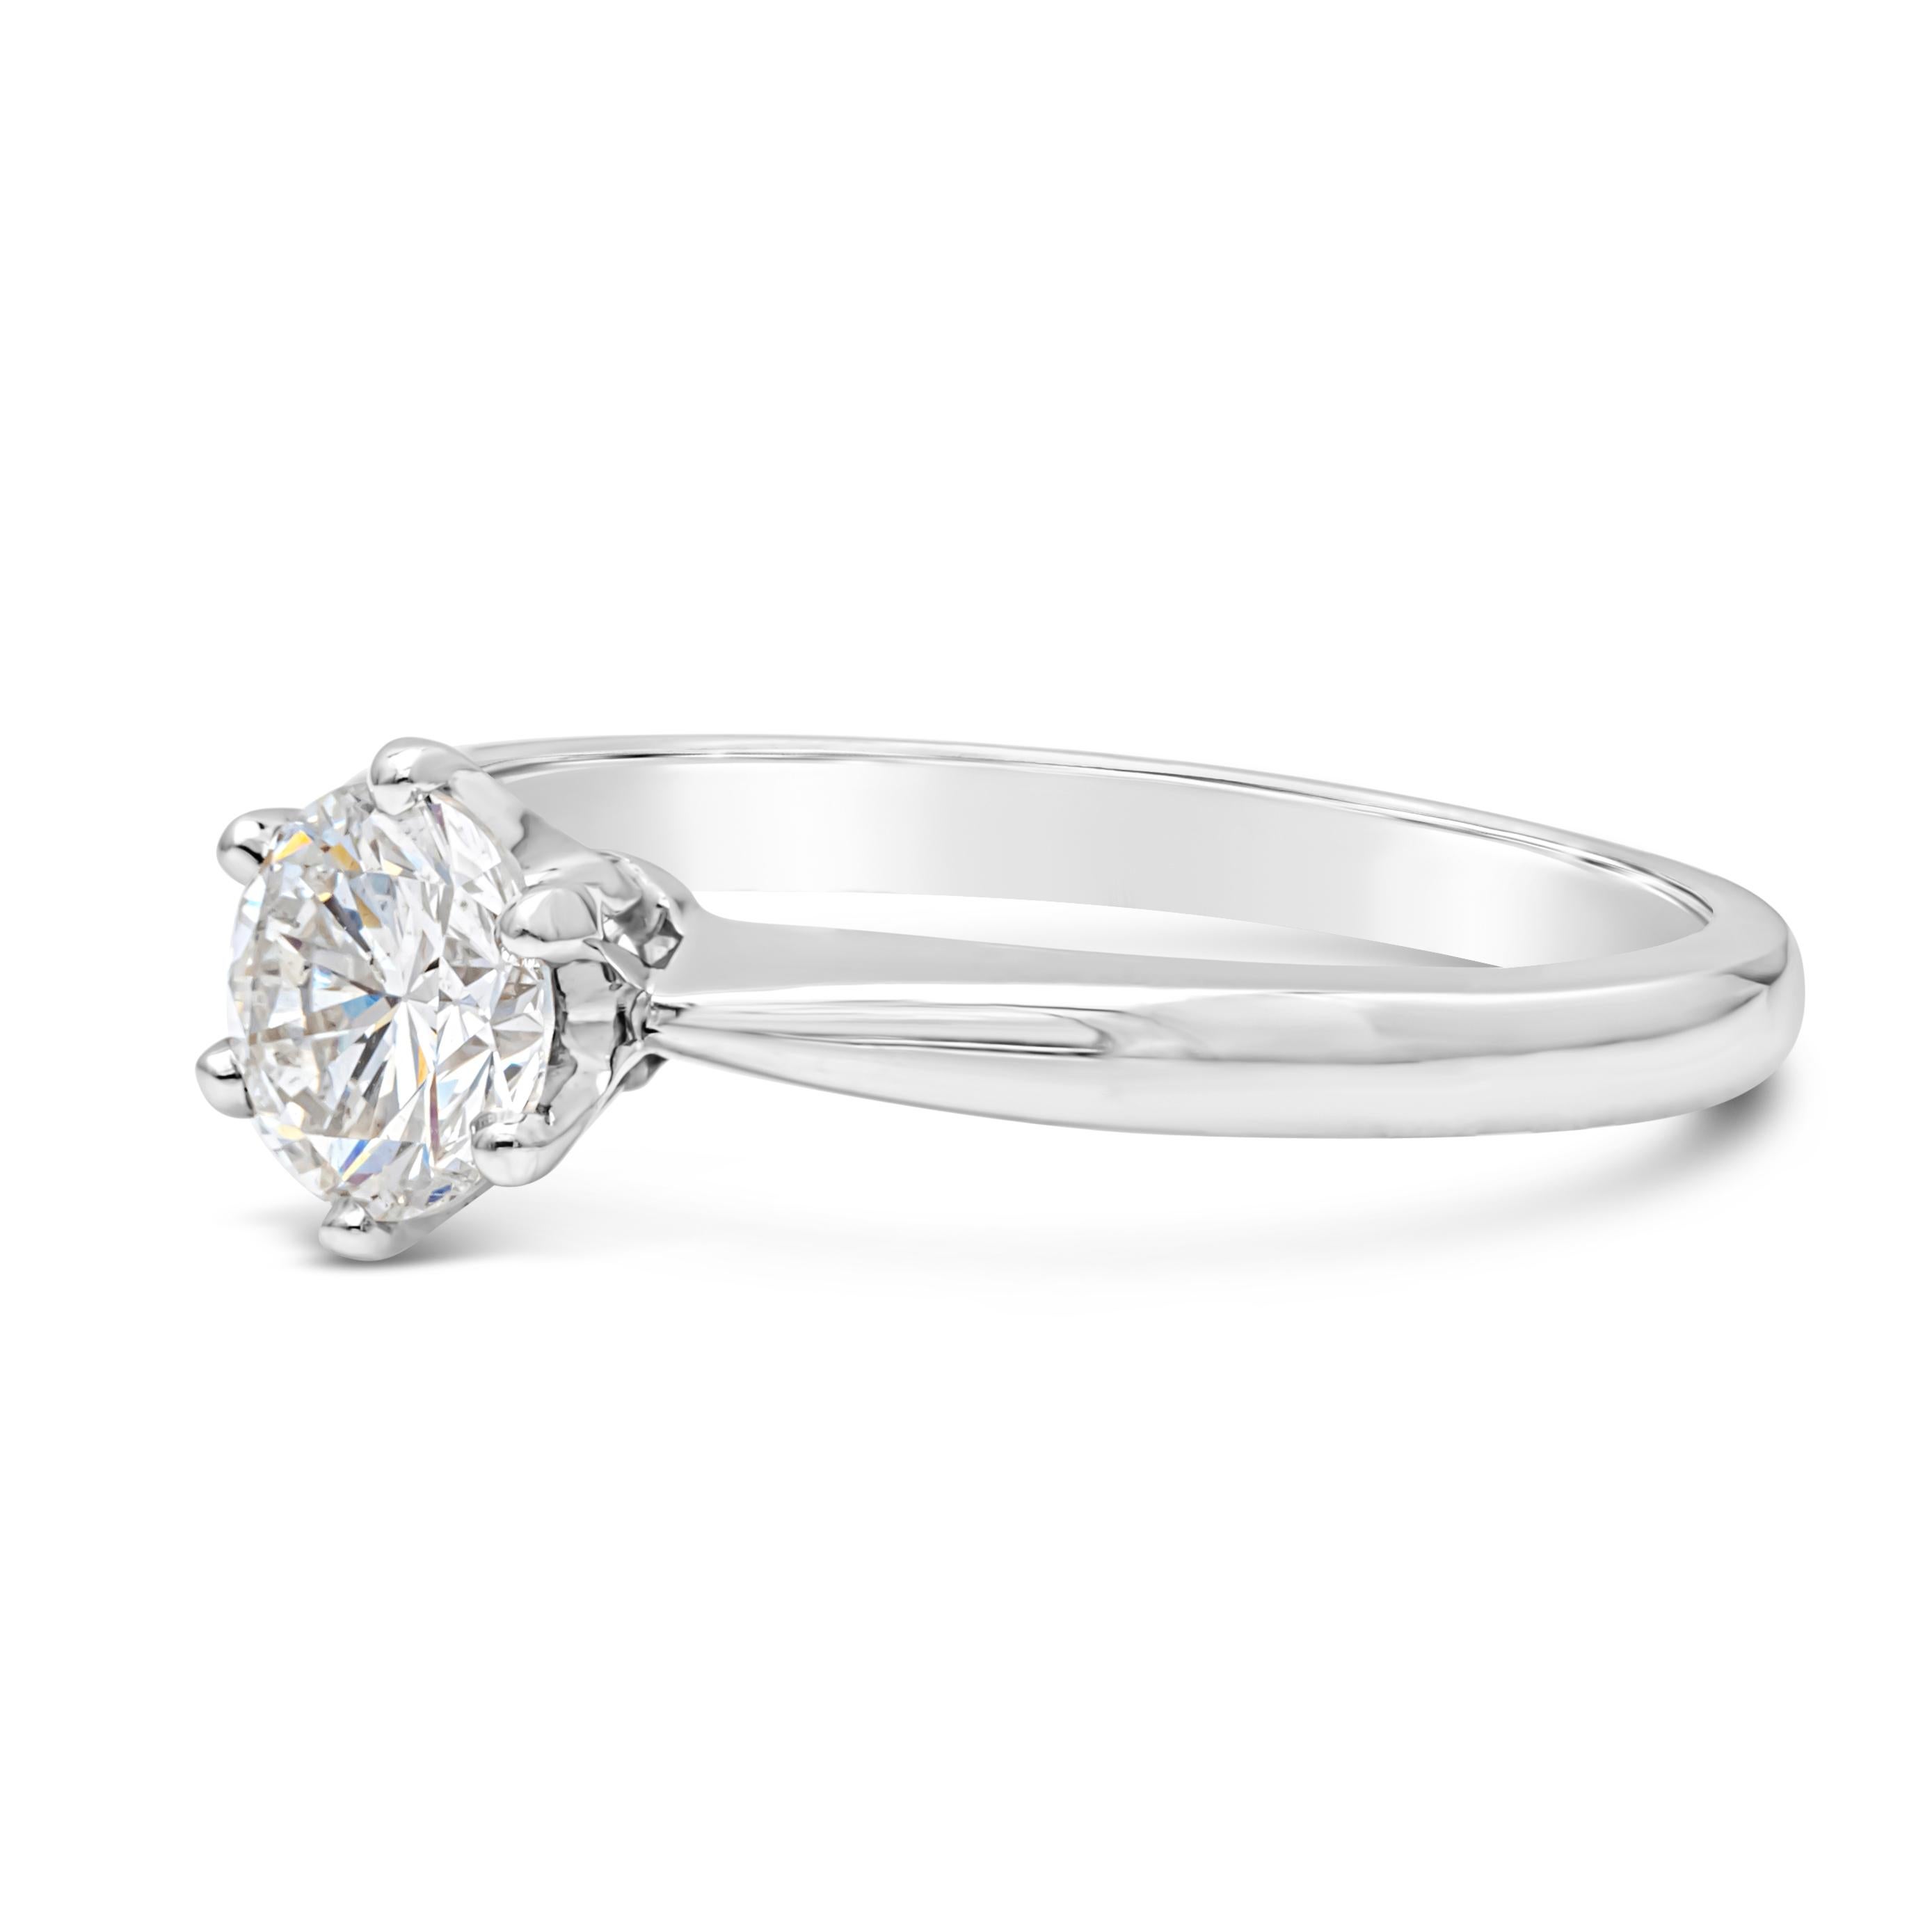 A classic and timeless solitaire engagement ring showcasing a 0.70 carat round brilliant diamond. EGL certified as D Color and SI1 in clarity. Set in a six prong basket setting, finely made in 18K White Gold. Size 6 US and resizable upon